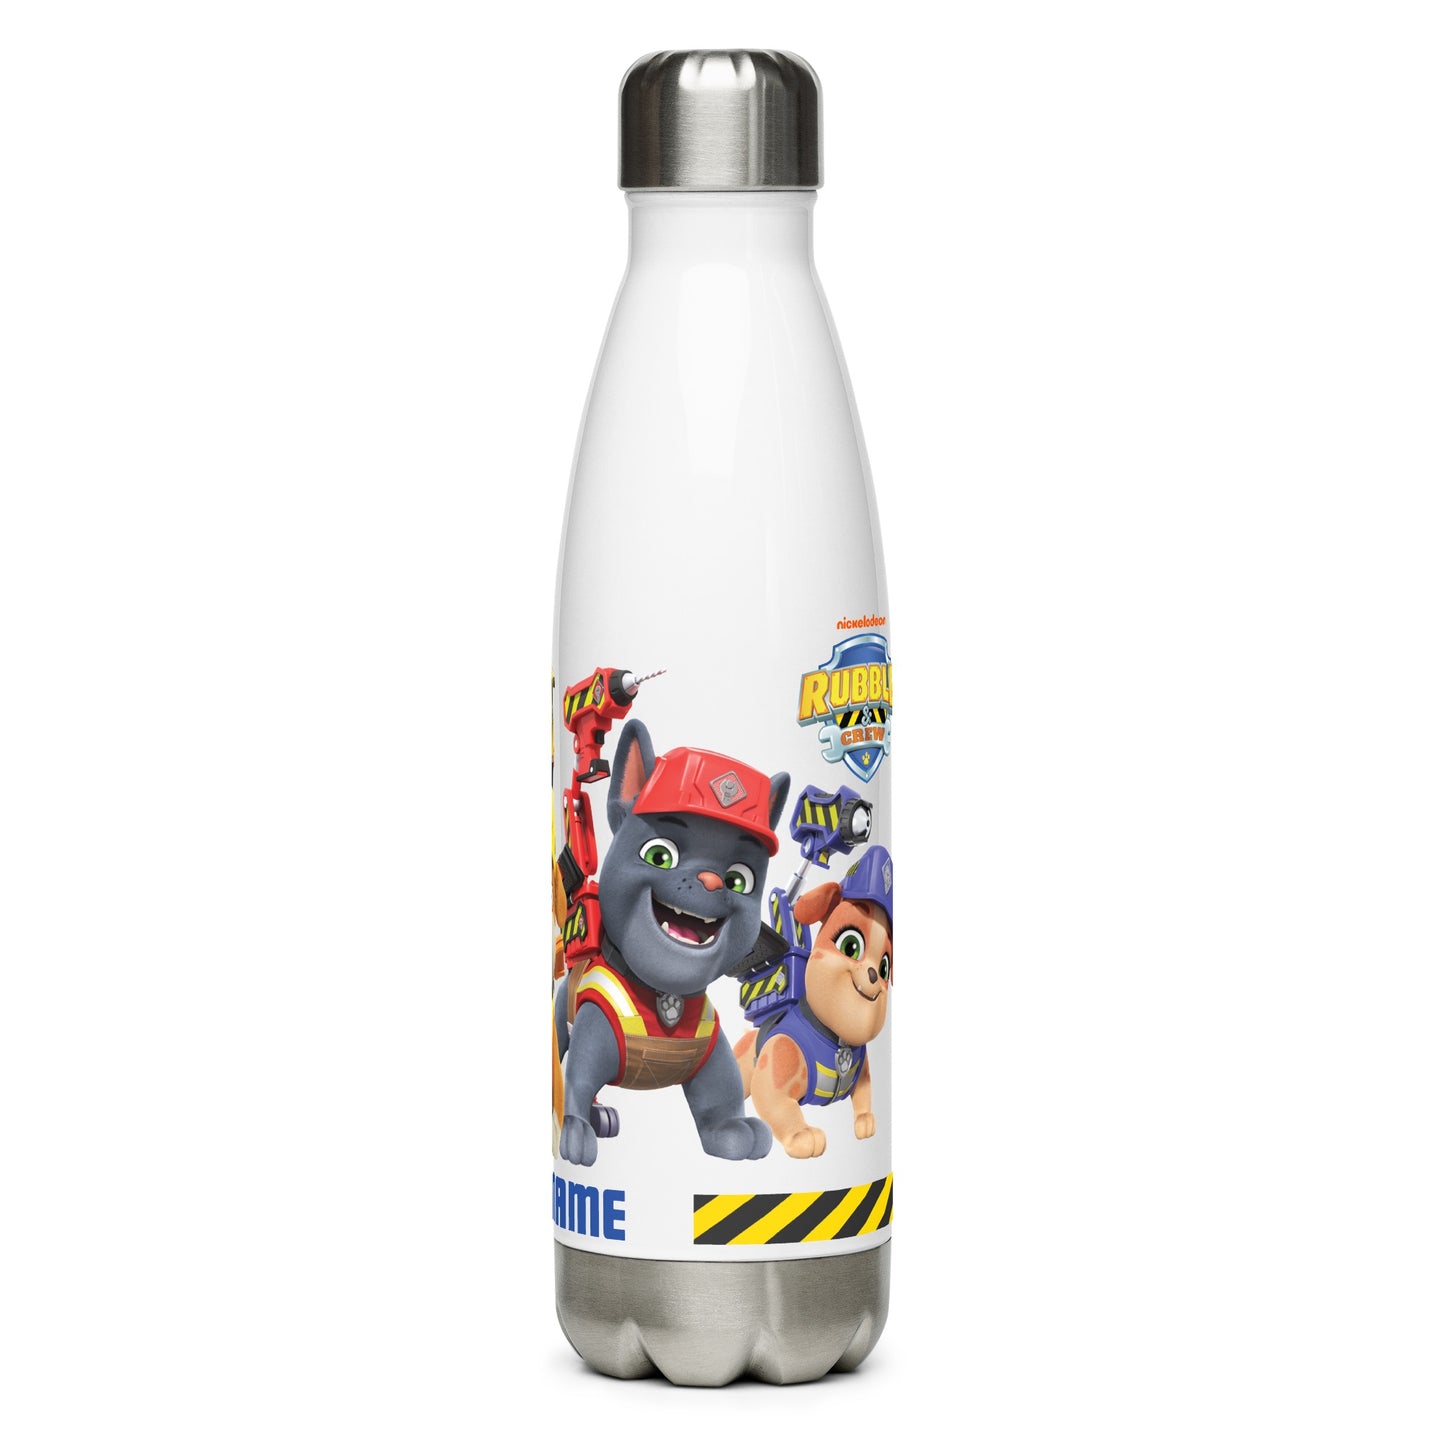 Rubble & Crew Characters Personalized Water Bottle